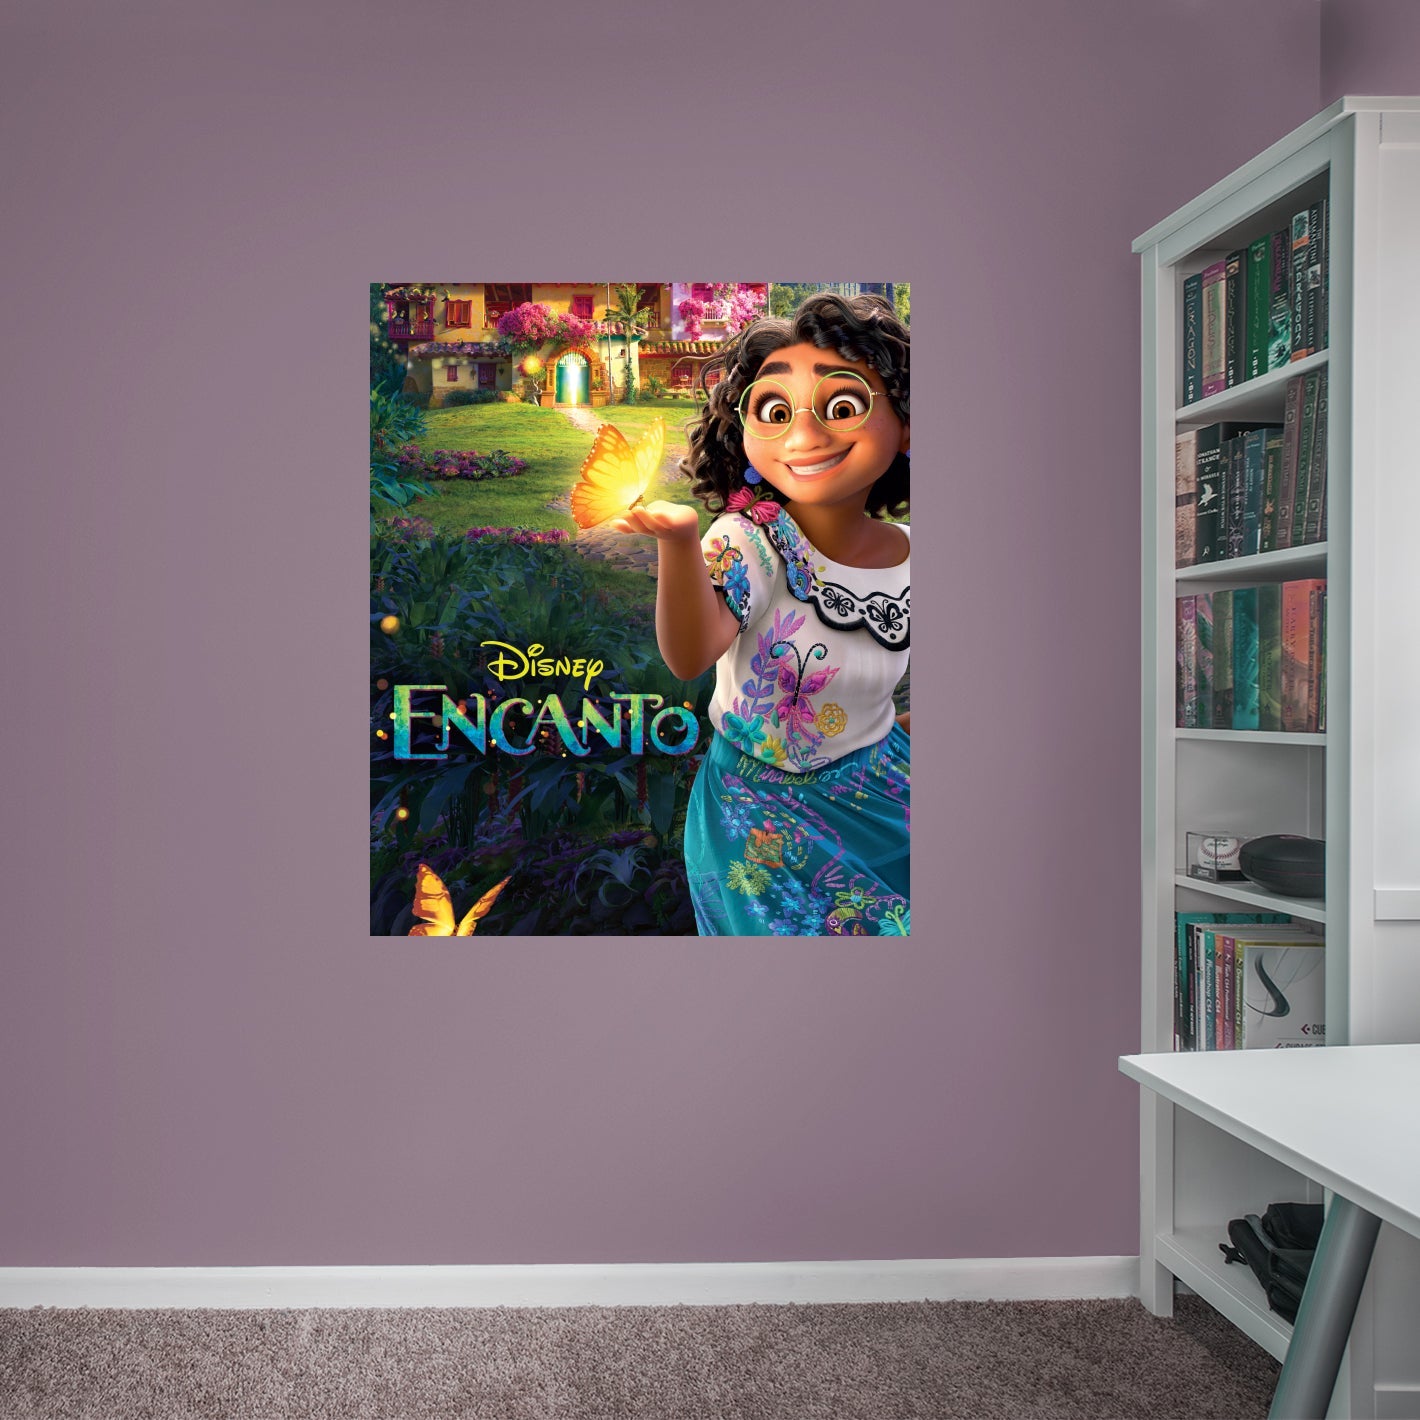 Encanto: Mirabel Movie Poster Poster - Officially Licensed Disney Removable Adhesive Decal